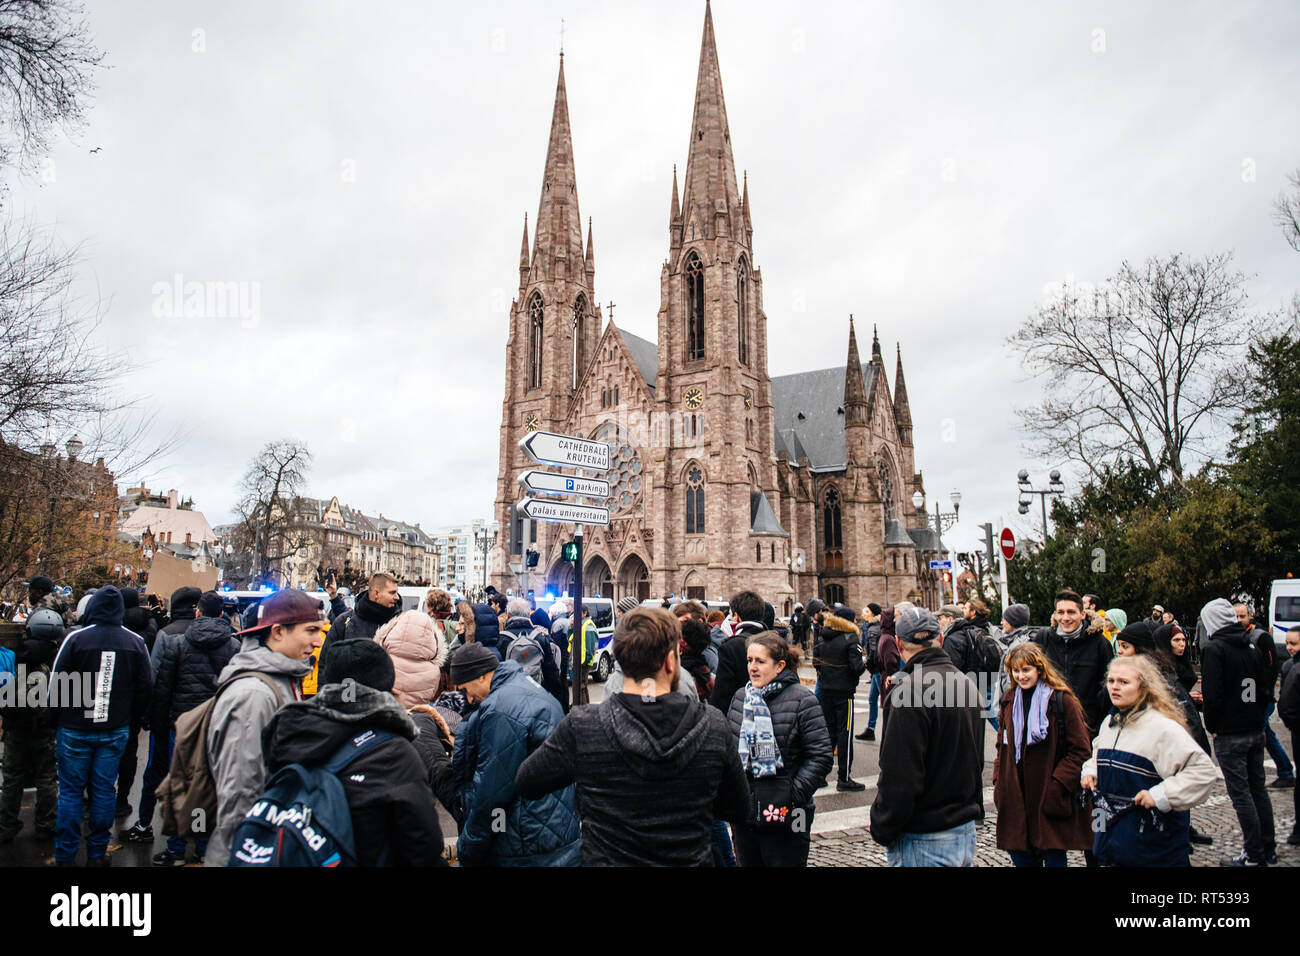 STRASBOURG, FRANCE - DEC 8, 2018: Crowd gathering in Central Strasbourg at the nationawide protest Marche Pour Le Climat in front of Reformed Church Saint Paul Stock Photo